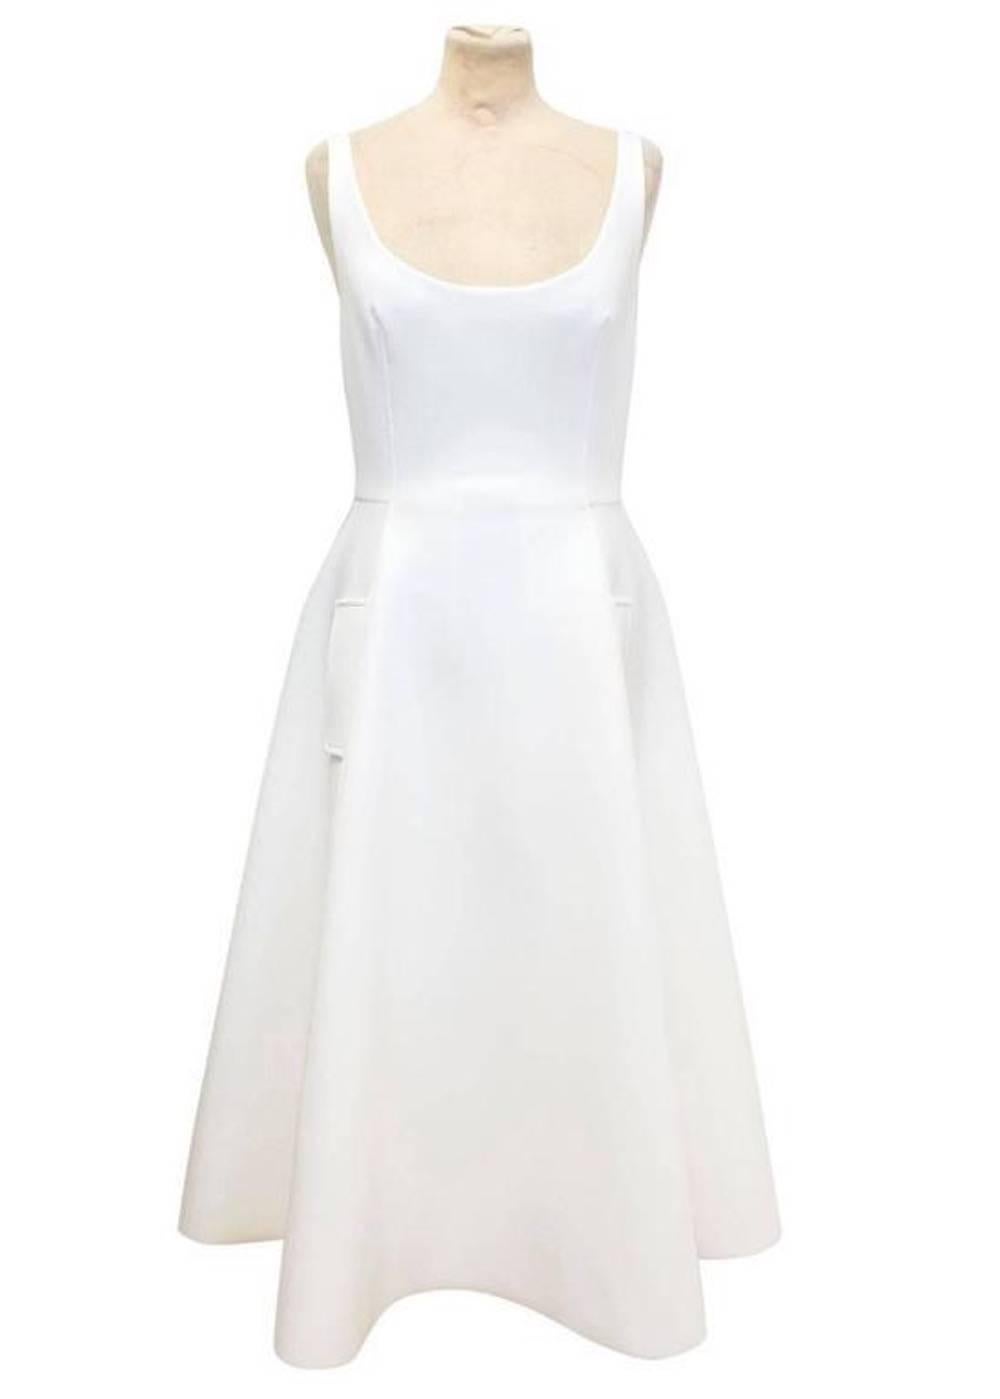 Lanvin white neoprene textured tea length sleeveless dress. features a scoop neckline, flared skirt, two side welt pockets on the skirt and fastens at the back with a concealed zip. 

Approx measurements.
Shoulders: 34cm
Chest: 41cm
Waist: